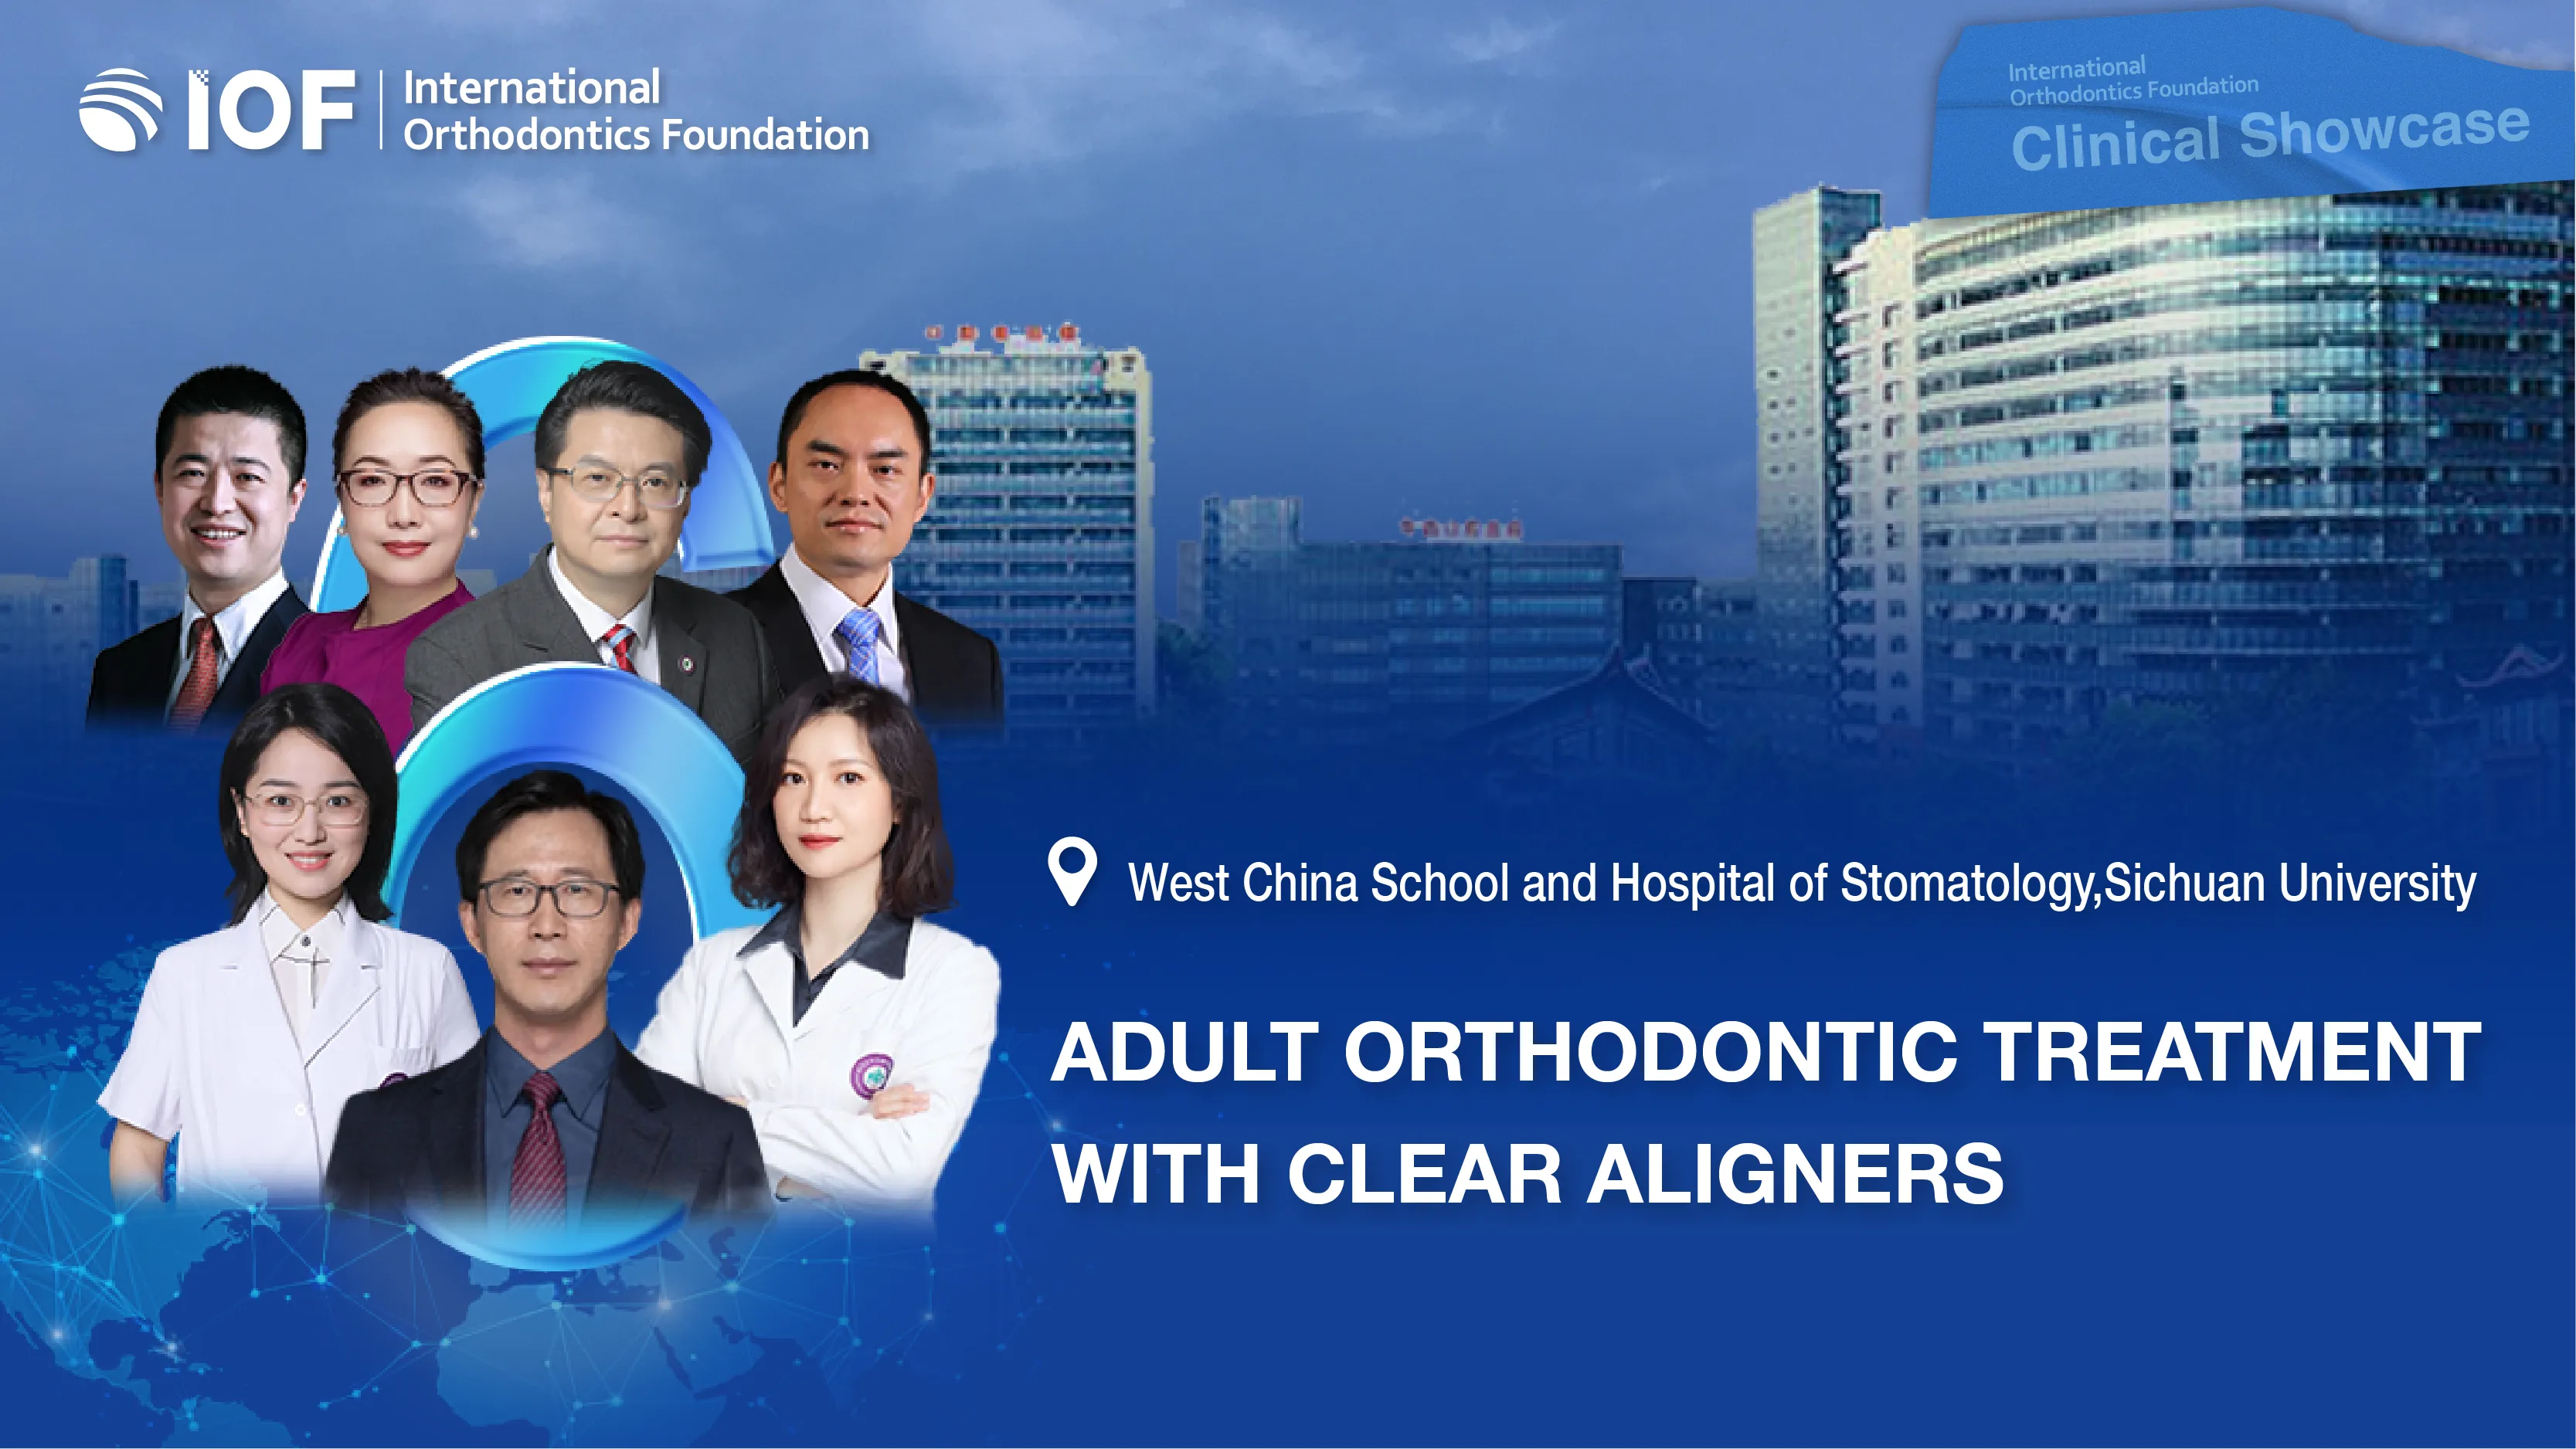 Adult Orthodontic Treatment with Clear Aligners